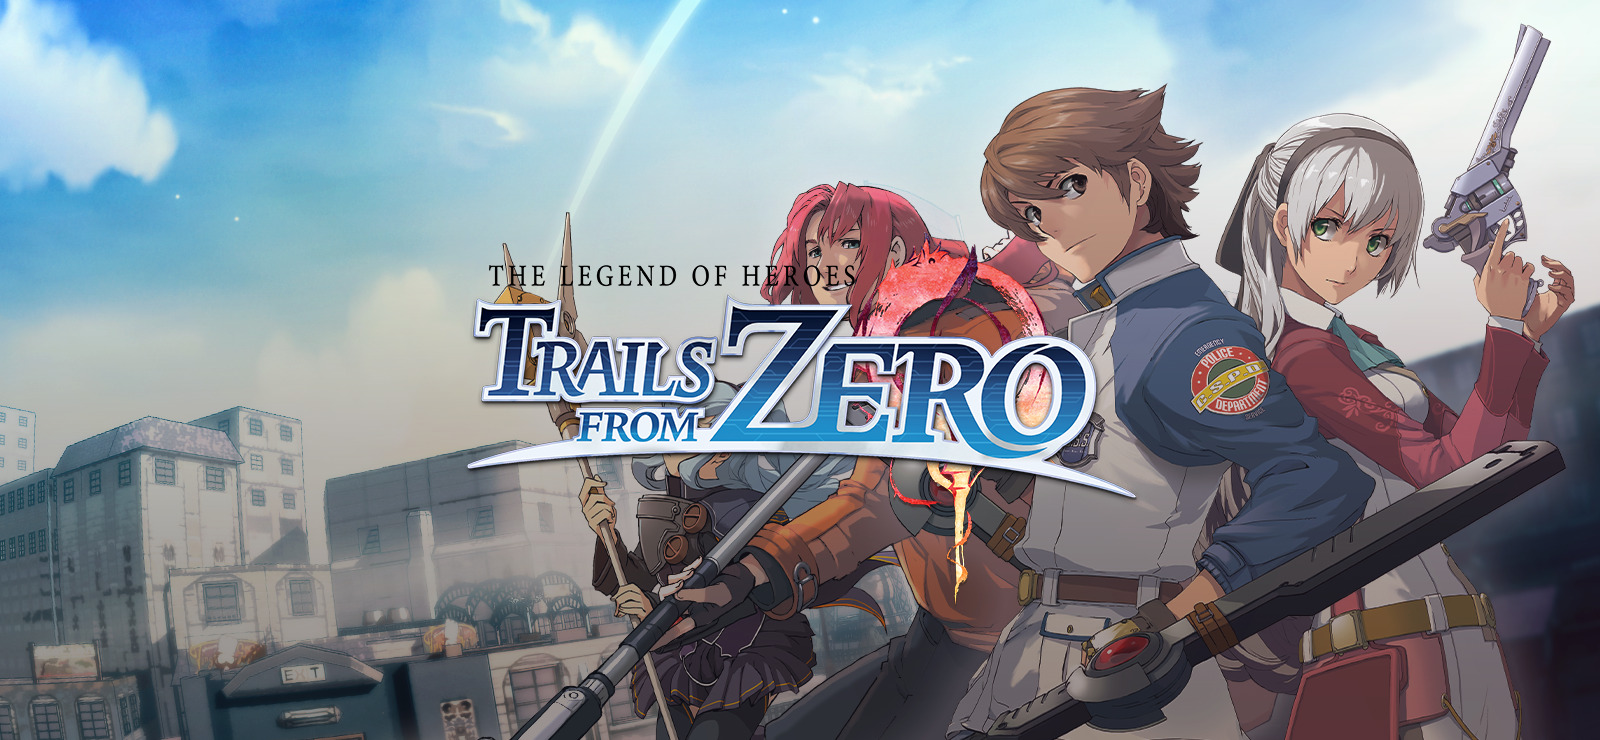 download the new version The Legend of Heroes: Trails from Zero